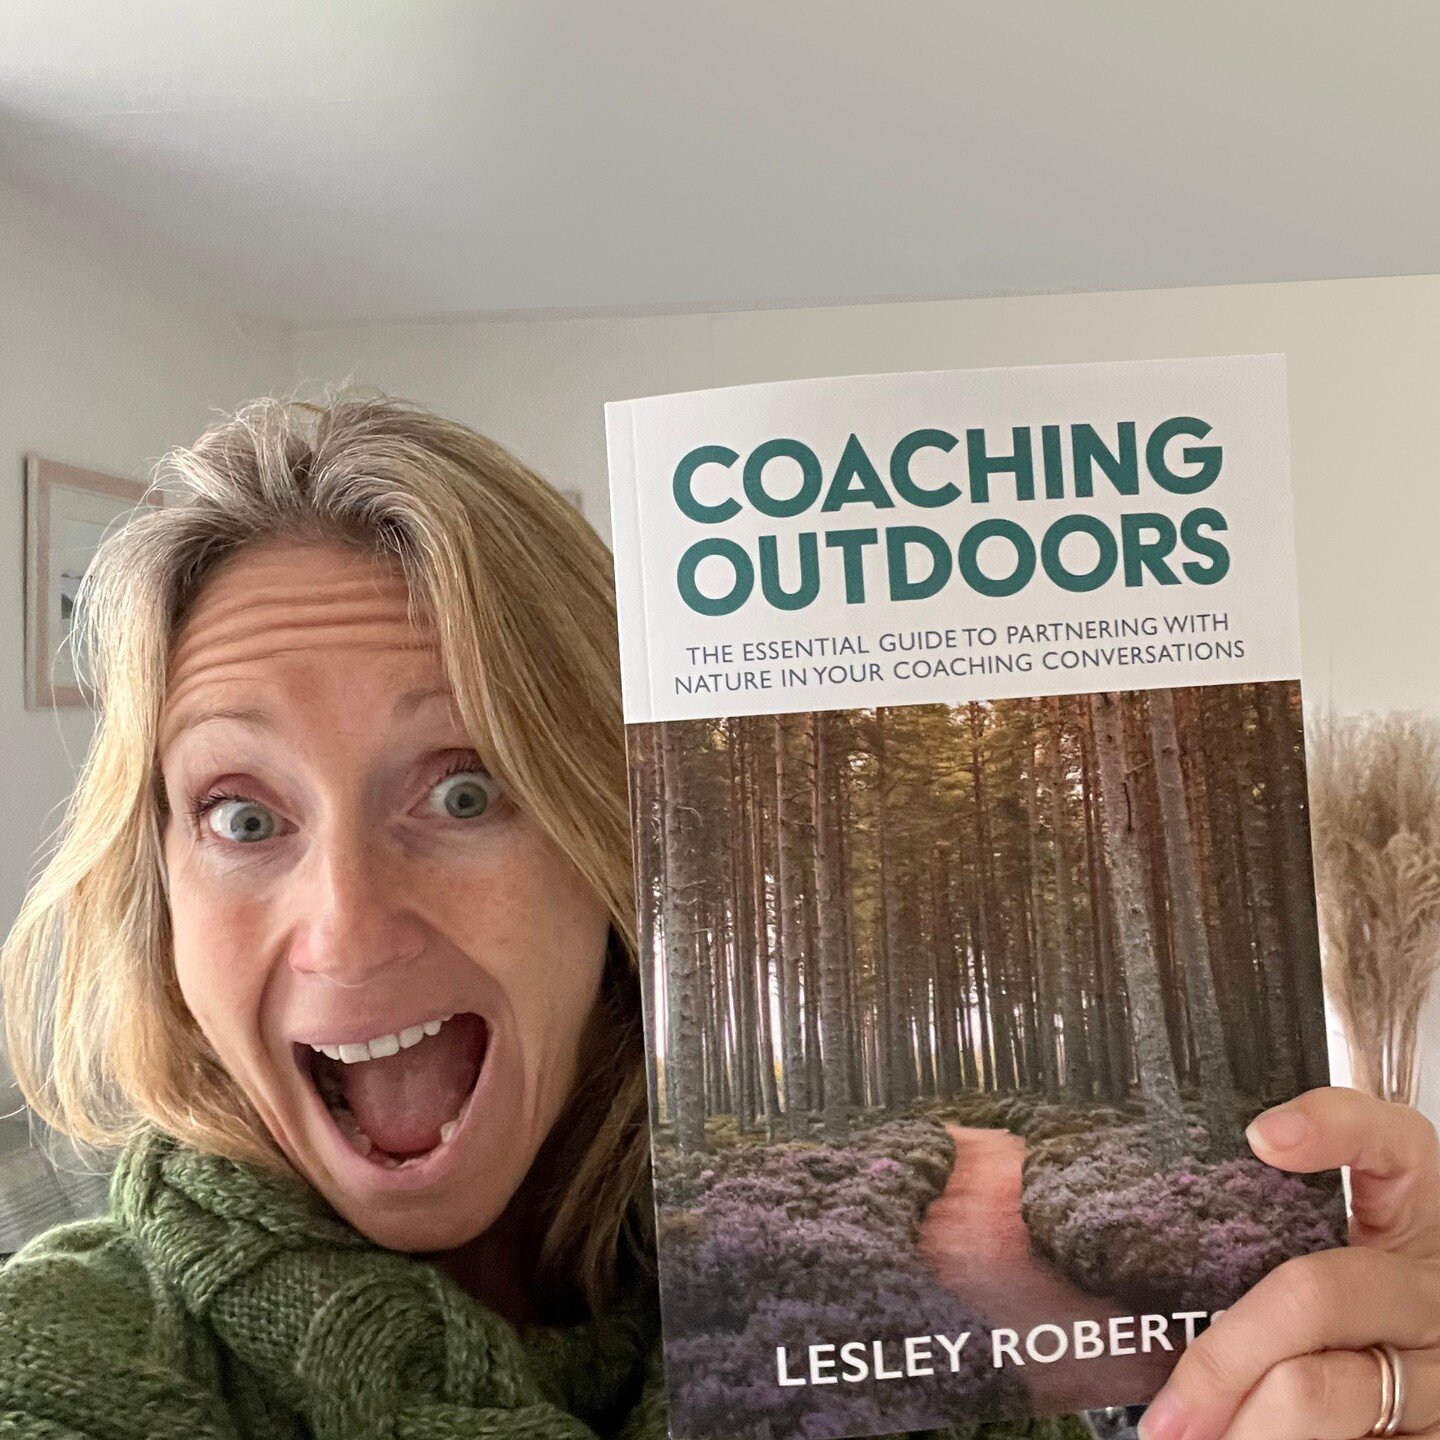 Here it is at last. 'Coaching Outdoors: The essential guide to partnering with nature in your coaching conversations.&quot; I have received my advanced author copies and I'm a little excited!

#coachingoutdoors #coaching #nature #author #book